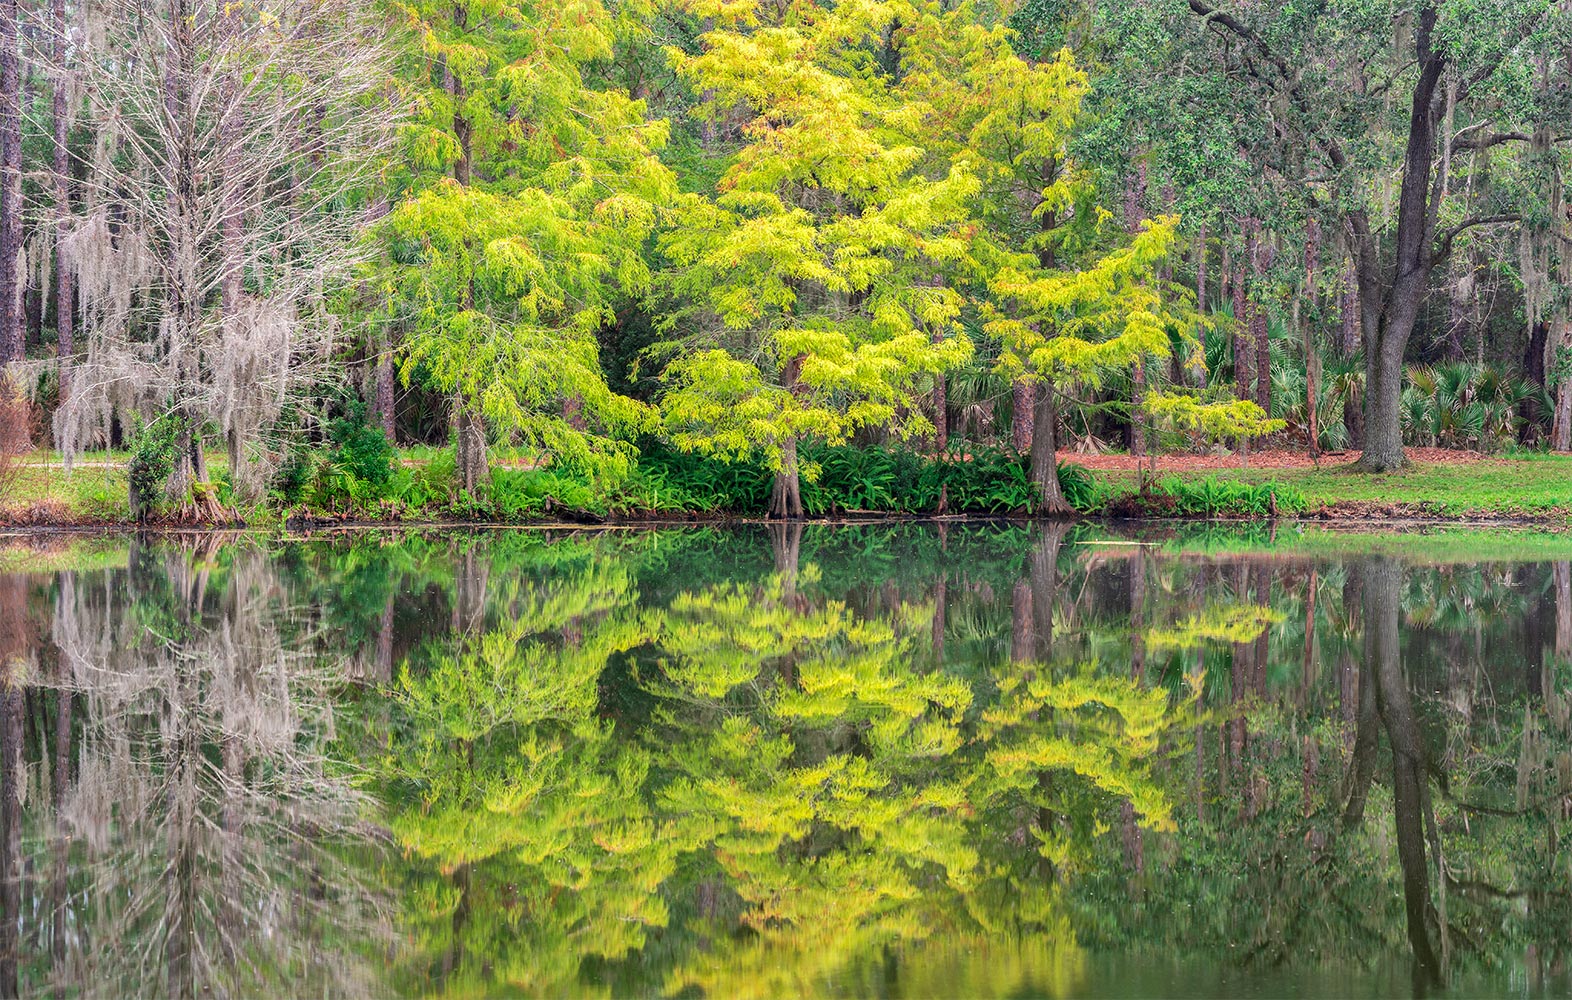 Reflective Calm – a Landscape Fine Art Photograph lakeside in a North Pinalls County Park by Brian Jones of 1350 West LLC